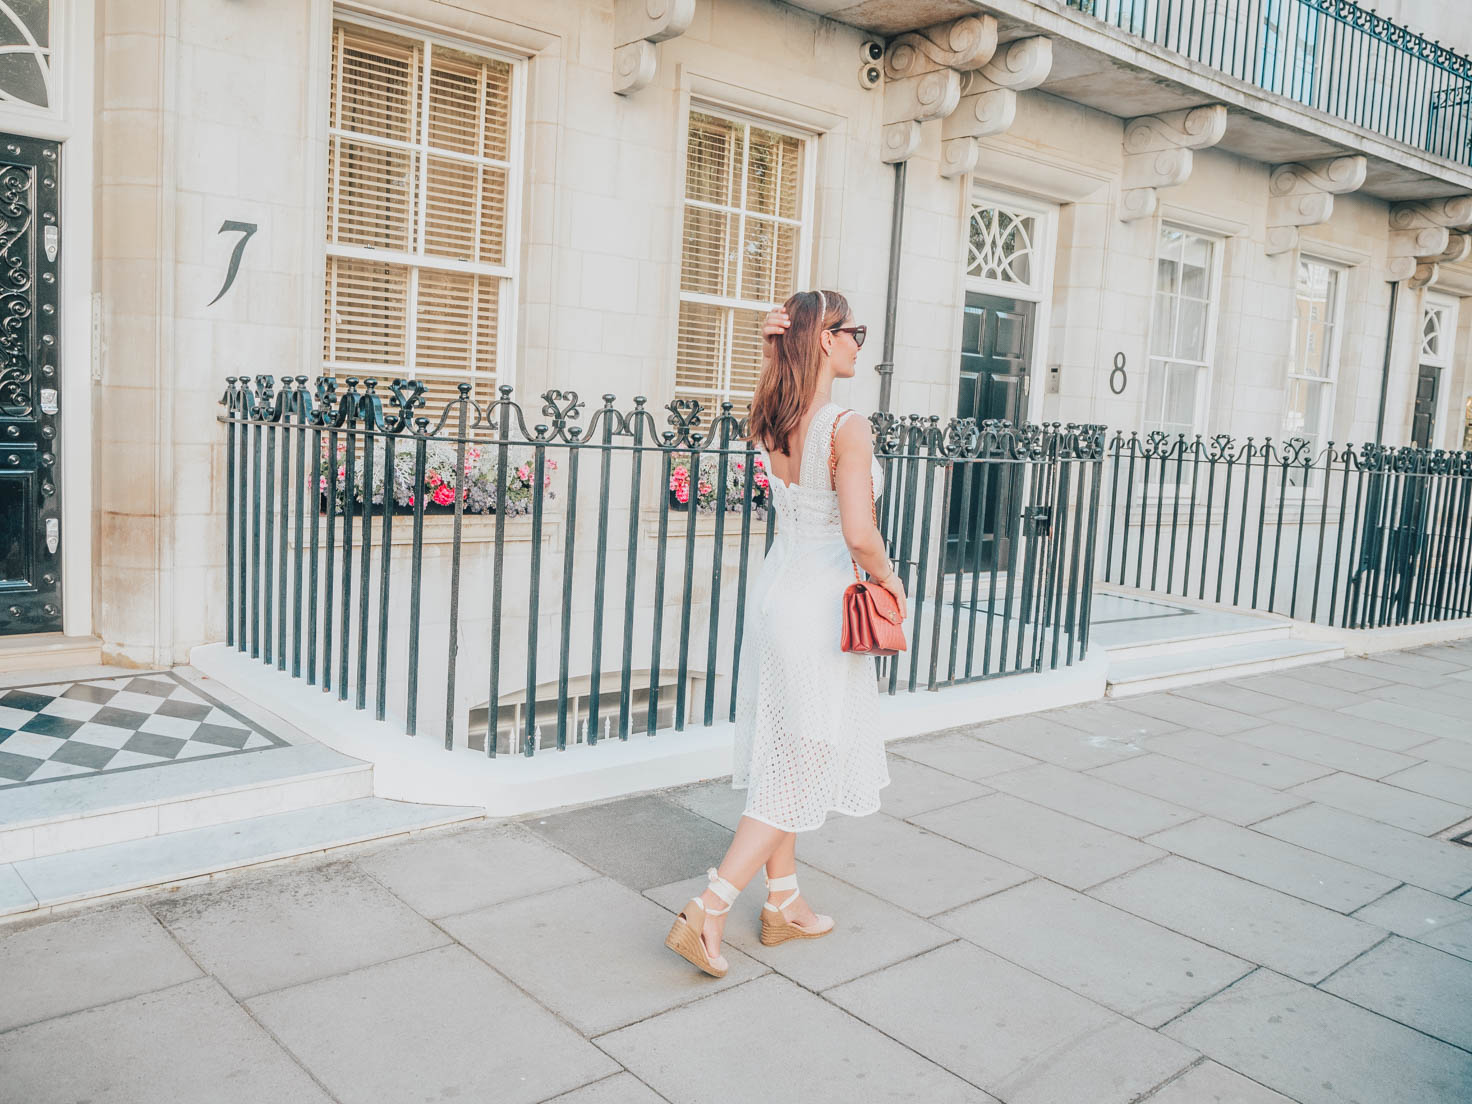 Petra from Chic Journal wearing Sandro white dress and Castaner espadrilles